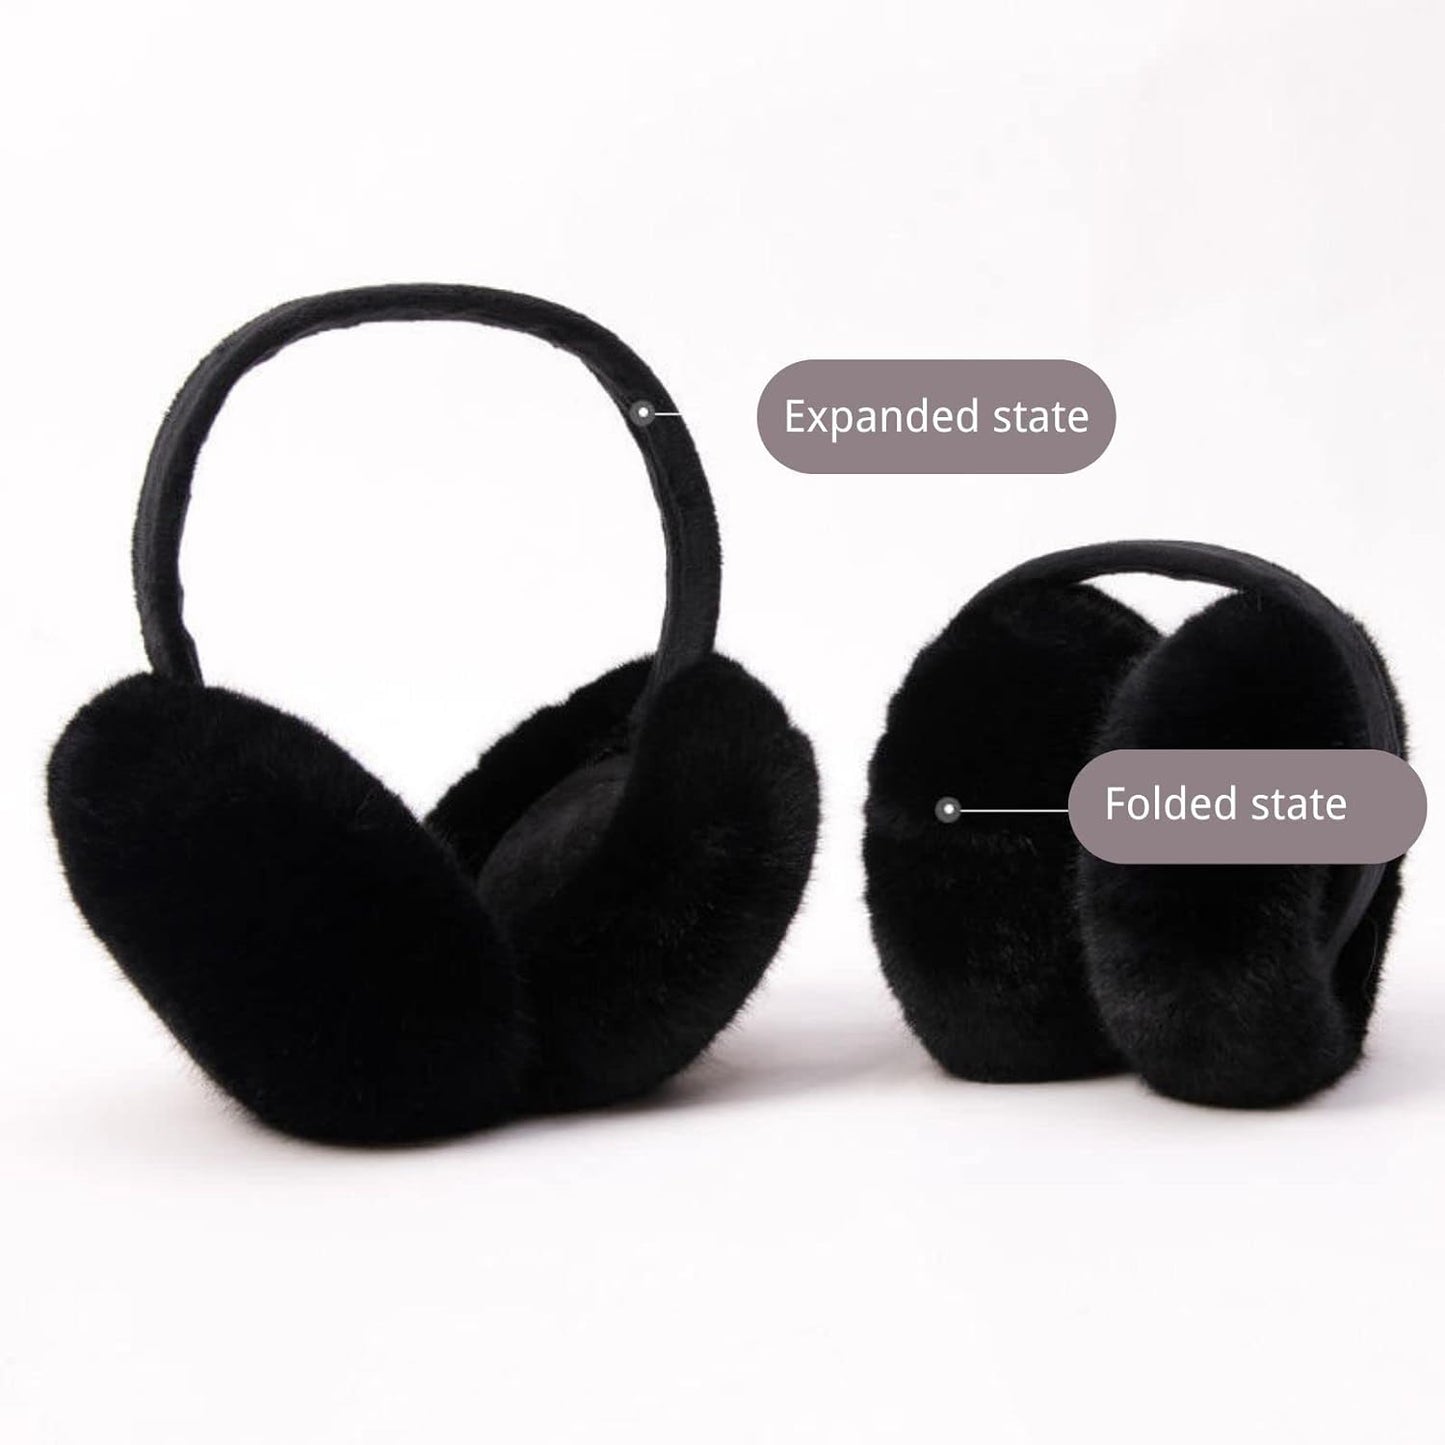 Ear Muffs for Women - Winter Ear Warmers - Soft & Warm Cable Knit Furry Fleece Earmuffs - Ear Covers for Cold Weather